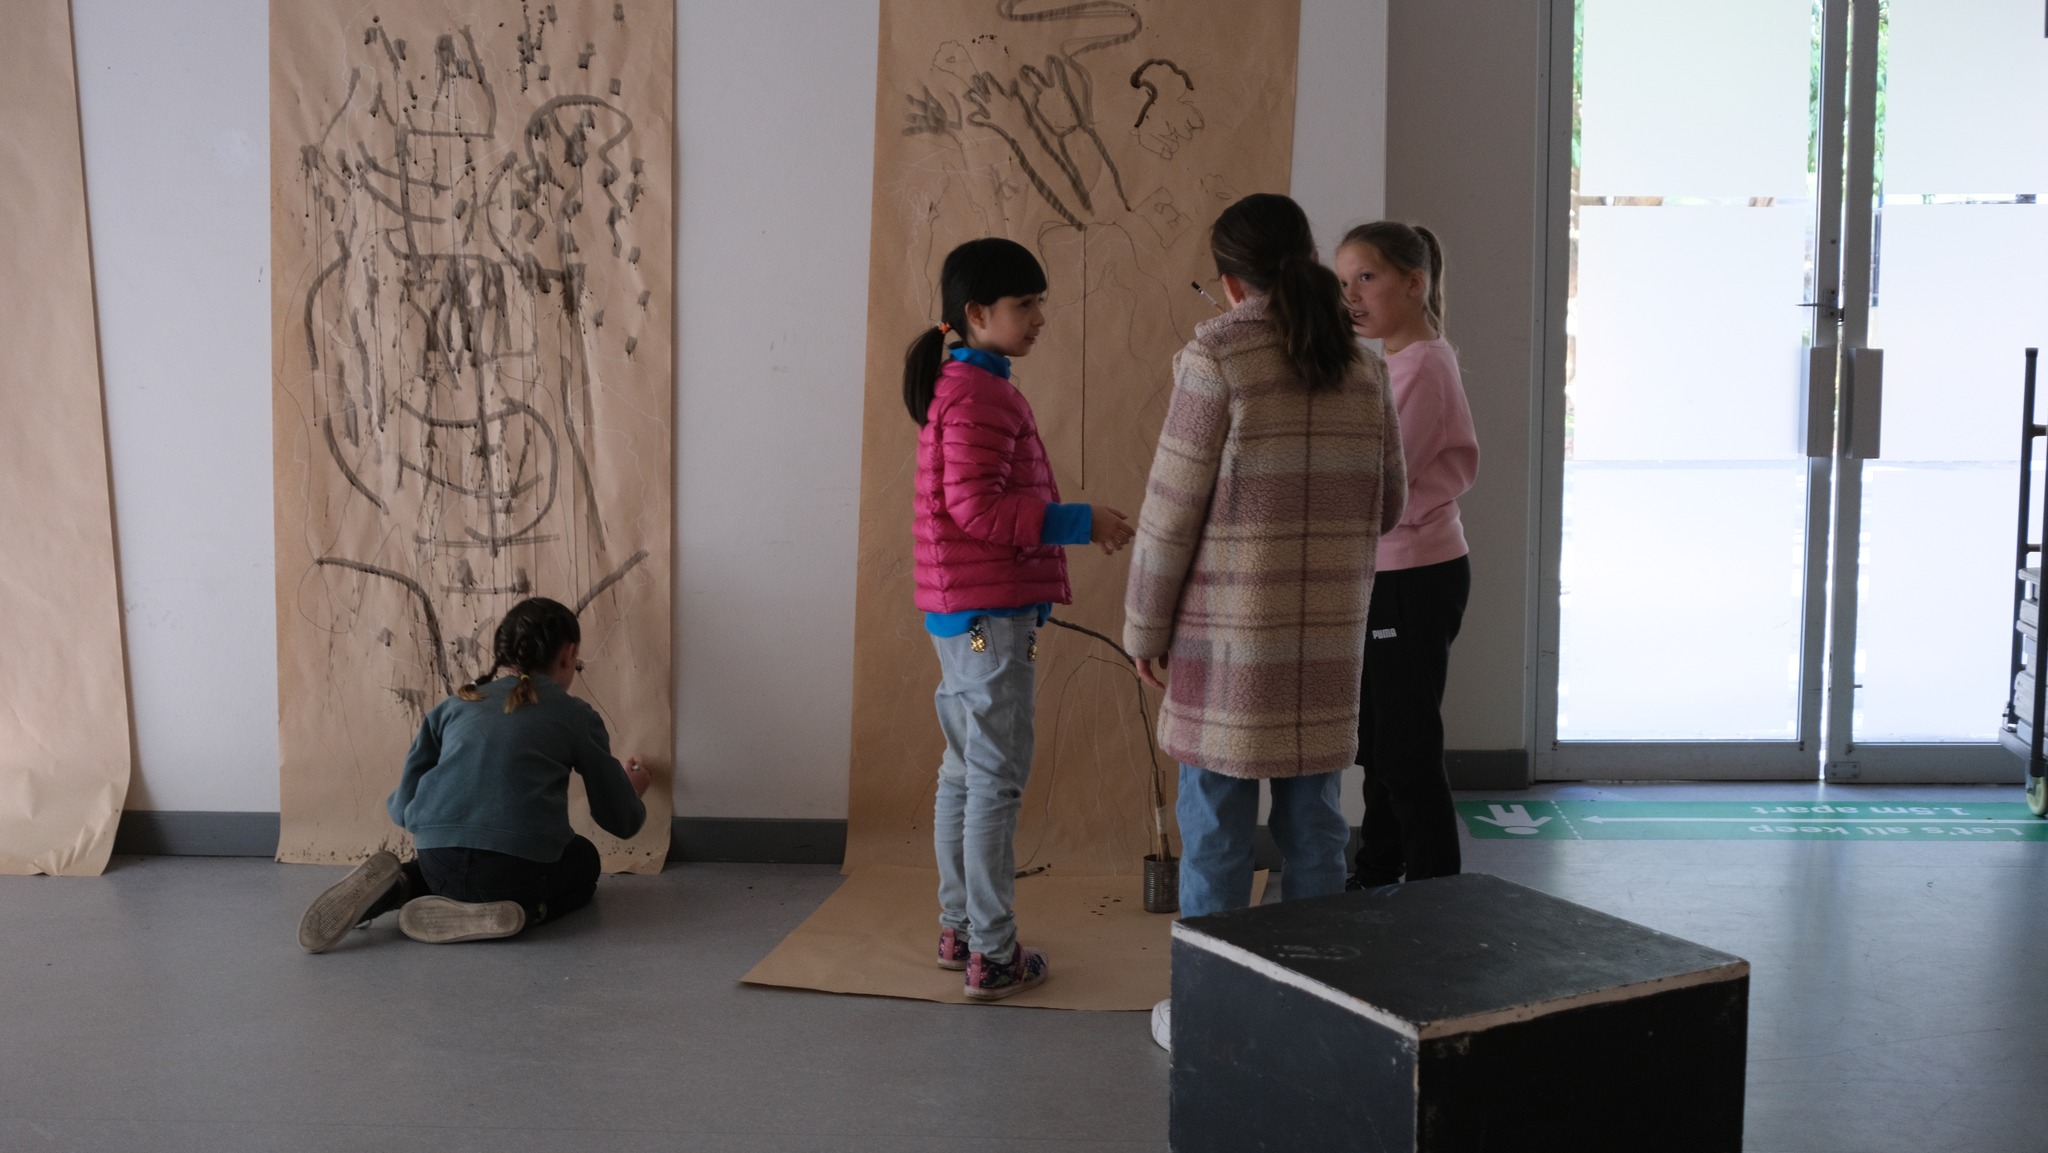 Primary students working collaboratively to draw with ink on large scale paper